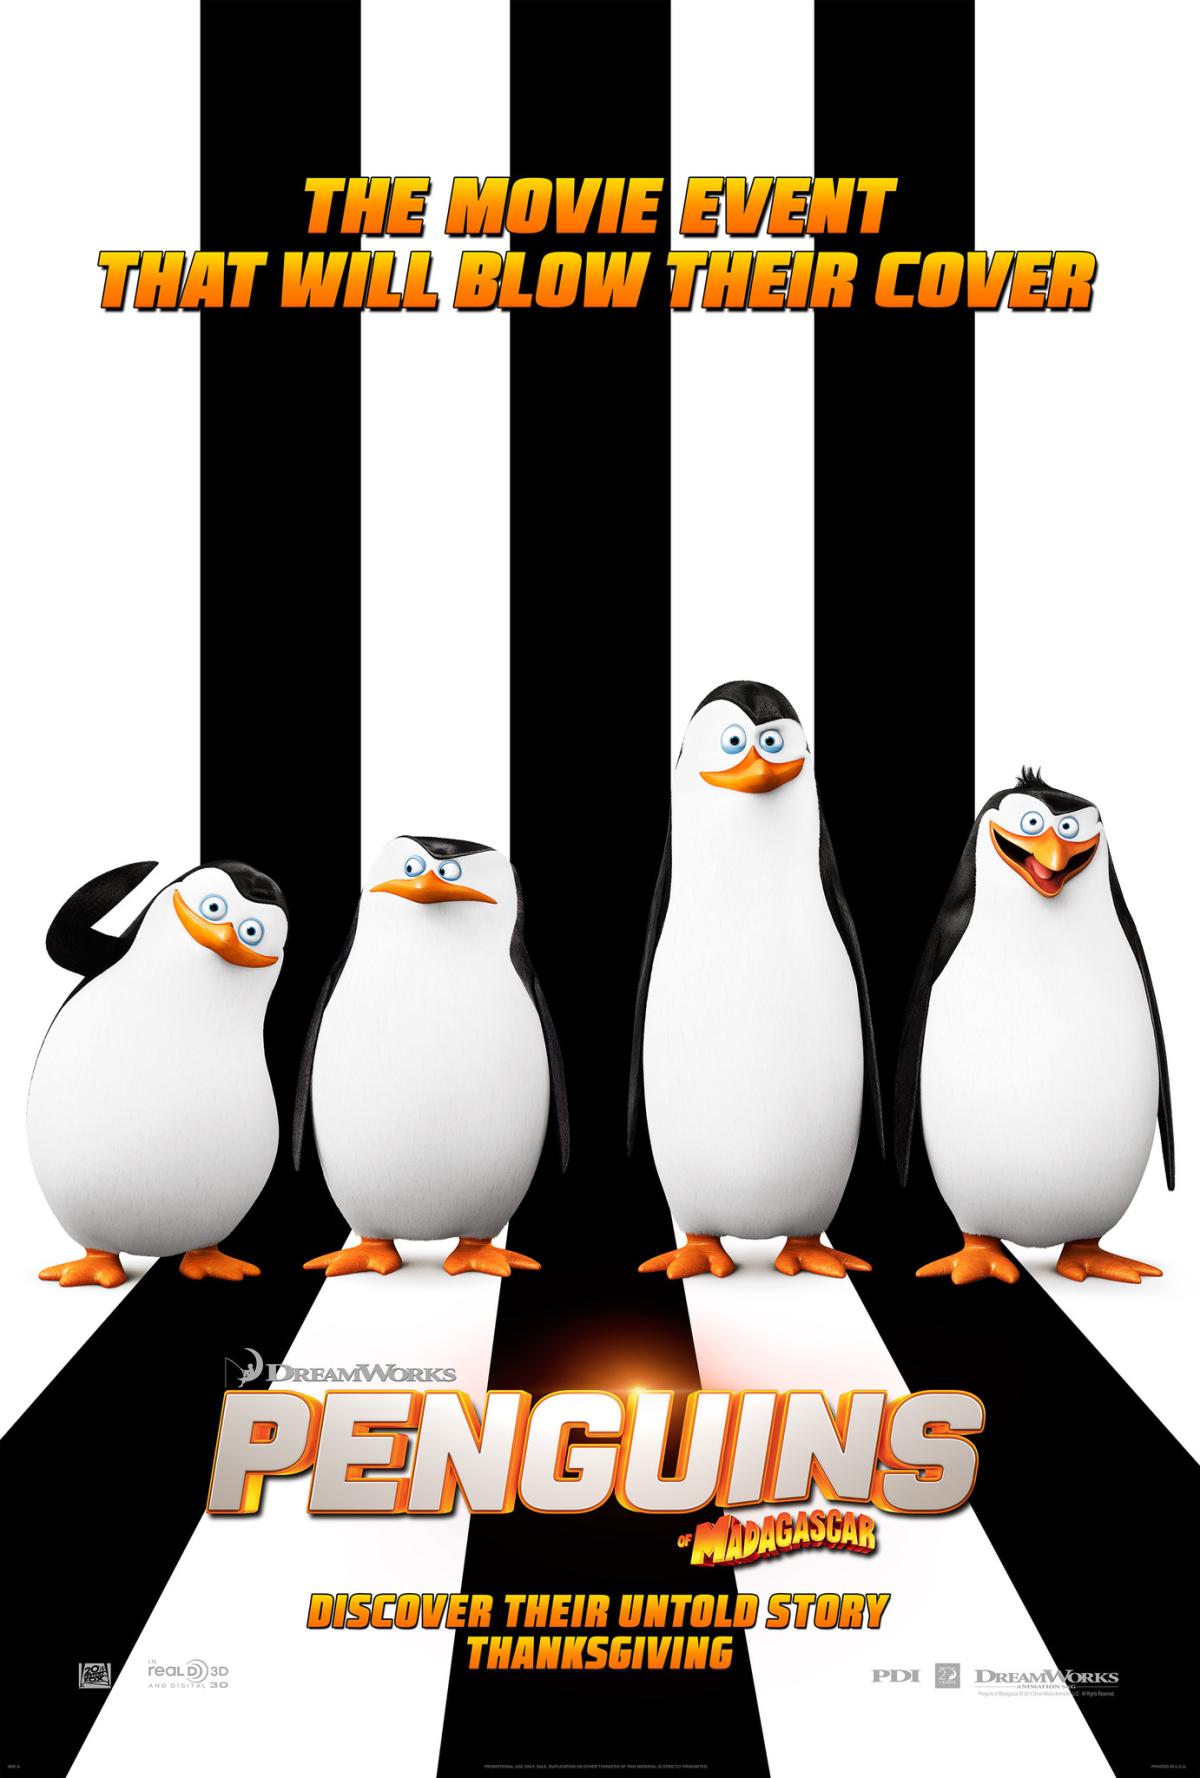 A movie poster featuring four penguins on a black and white striped background. The text reads "the movie event that will blow their cover"